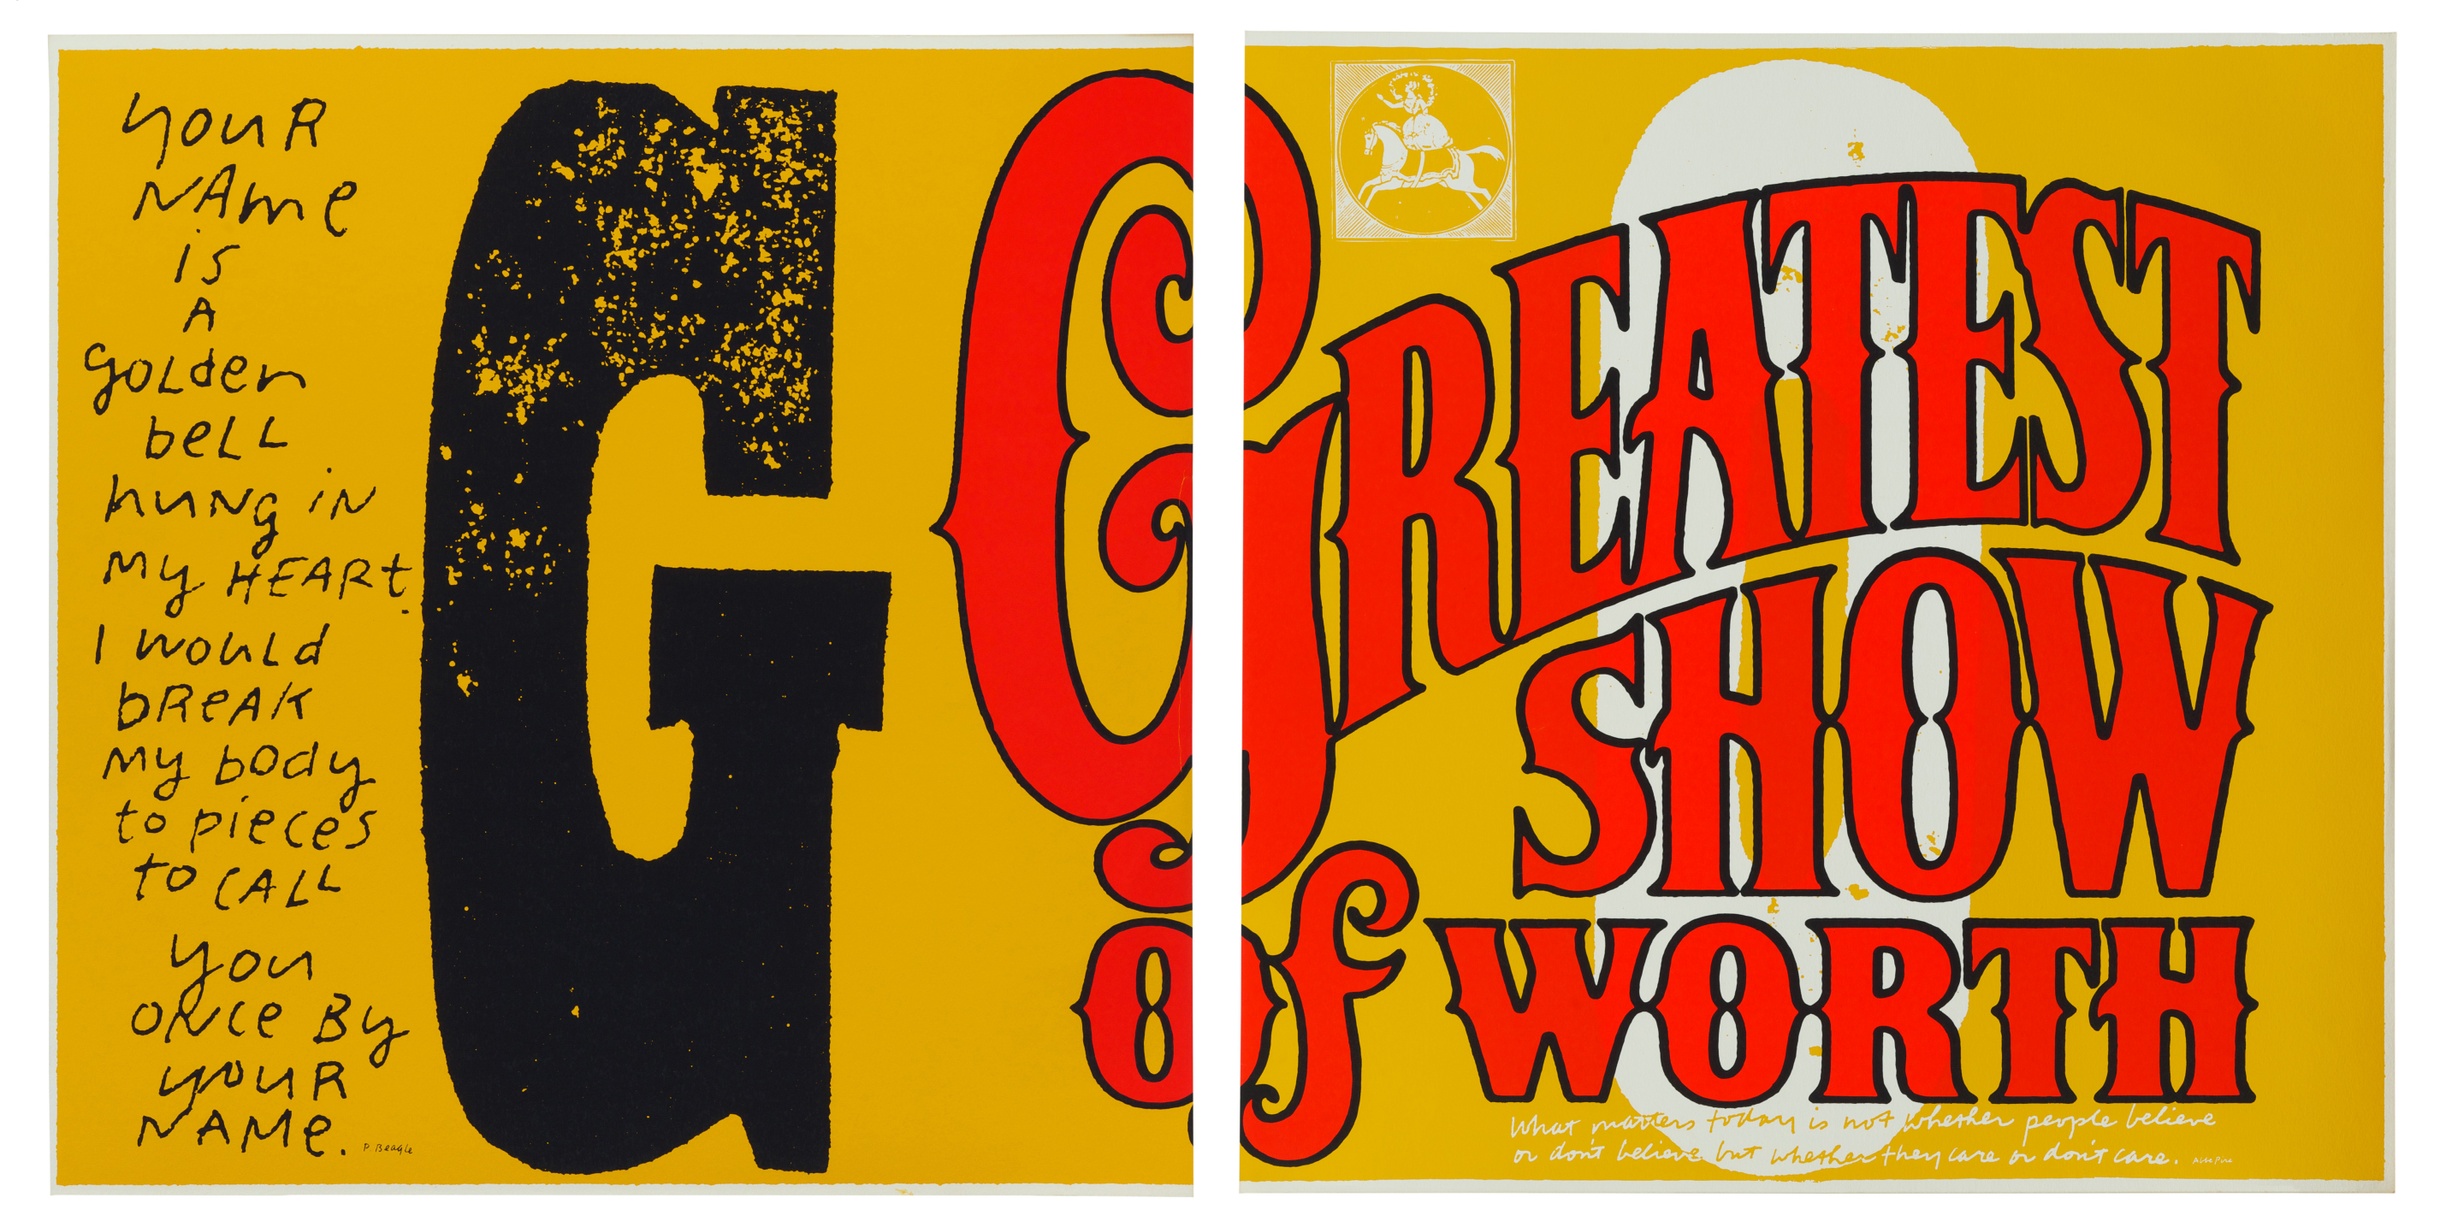 Corita Kent, *G greatest show of worth* and *O greatest show of worth* (from *circus alphabet*), 1968, serigraphs, each approximately 23 x 22 3/4 inches, Tang Teaching Museum collection, gifts of Harry Hambly, serigrapher, Hambly Studios, 2016.14.9, .7